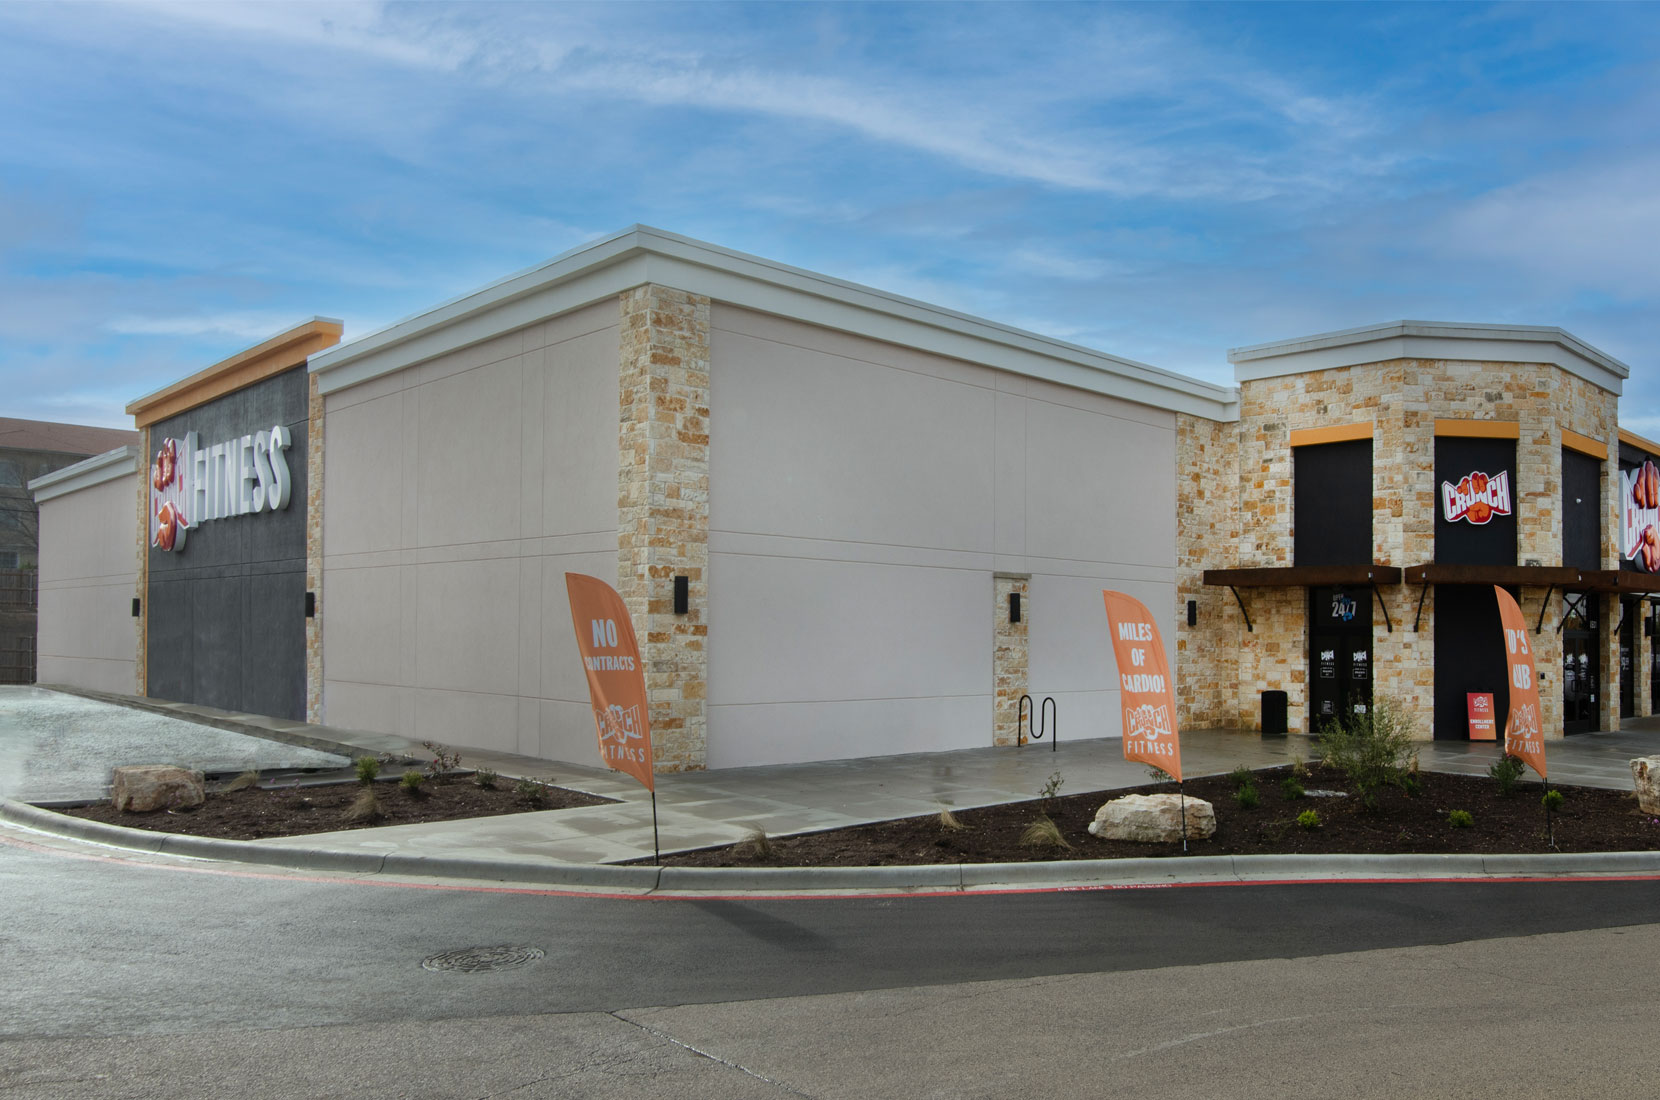 Gateway Plaza Crunch Fitness in Temple, Texas